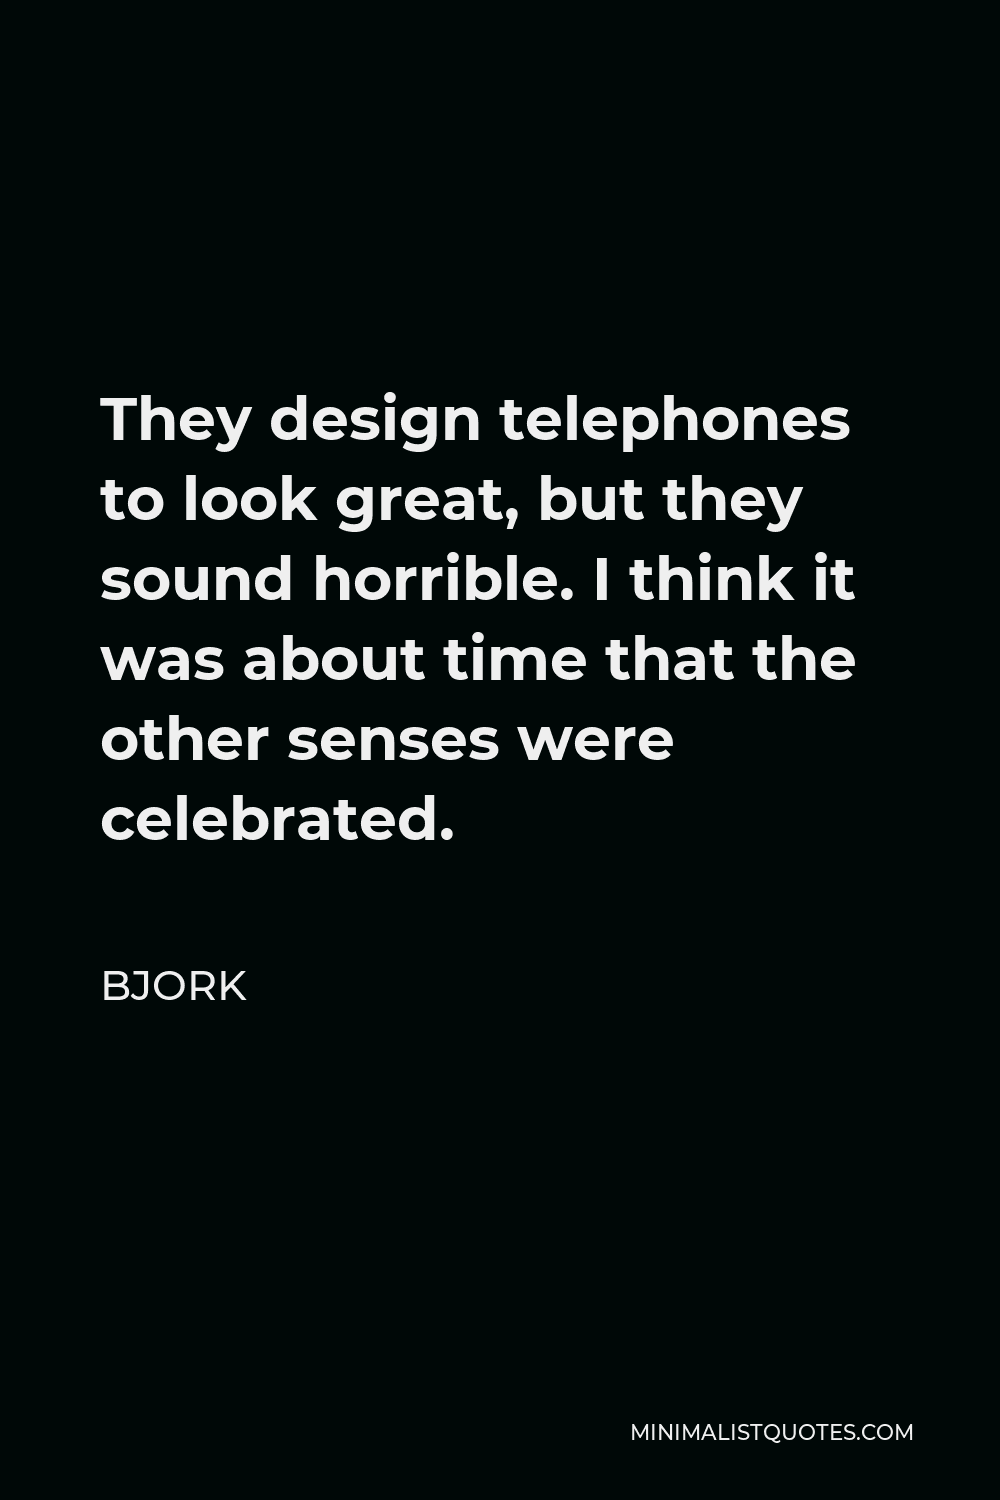 Bjork Quote - They design telephones to look great, but they sound horrible. I think it was about time that the other senses were celebrated.